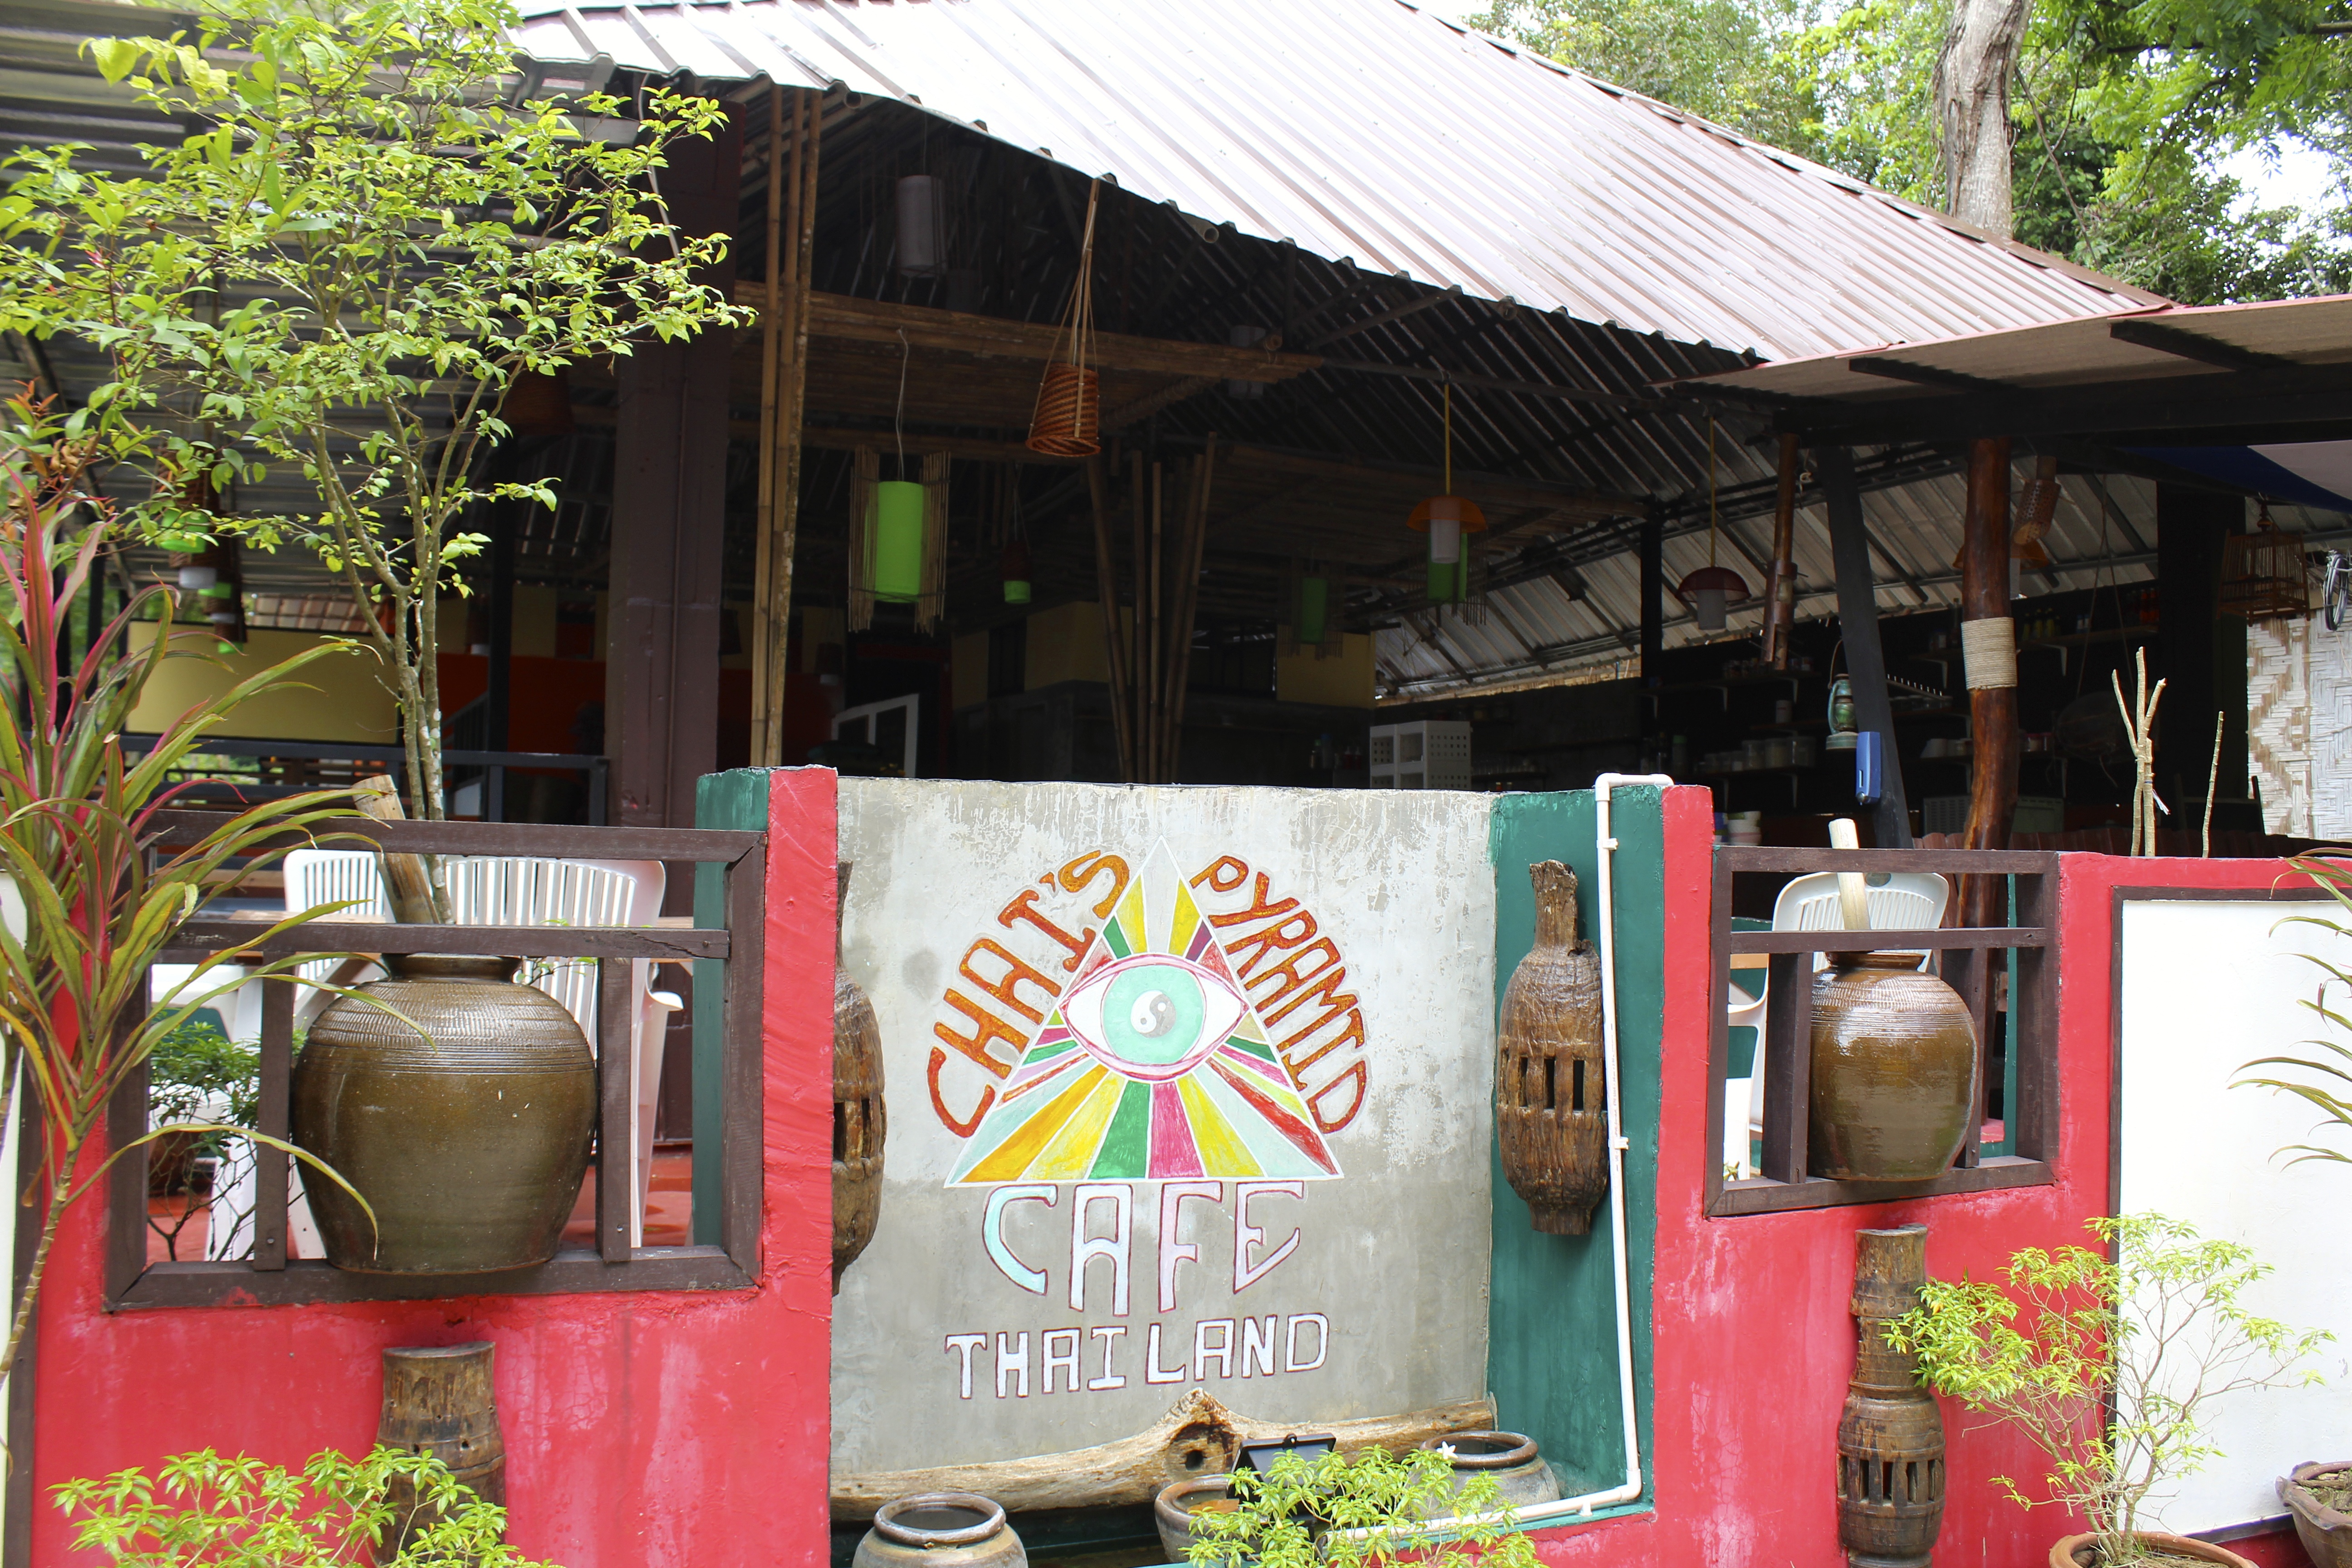 Stop here for some authentic Thai food.